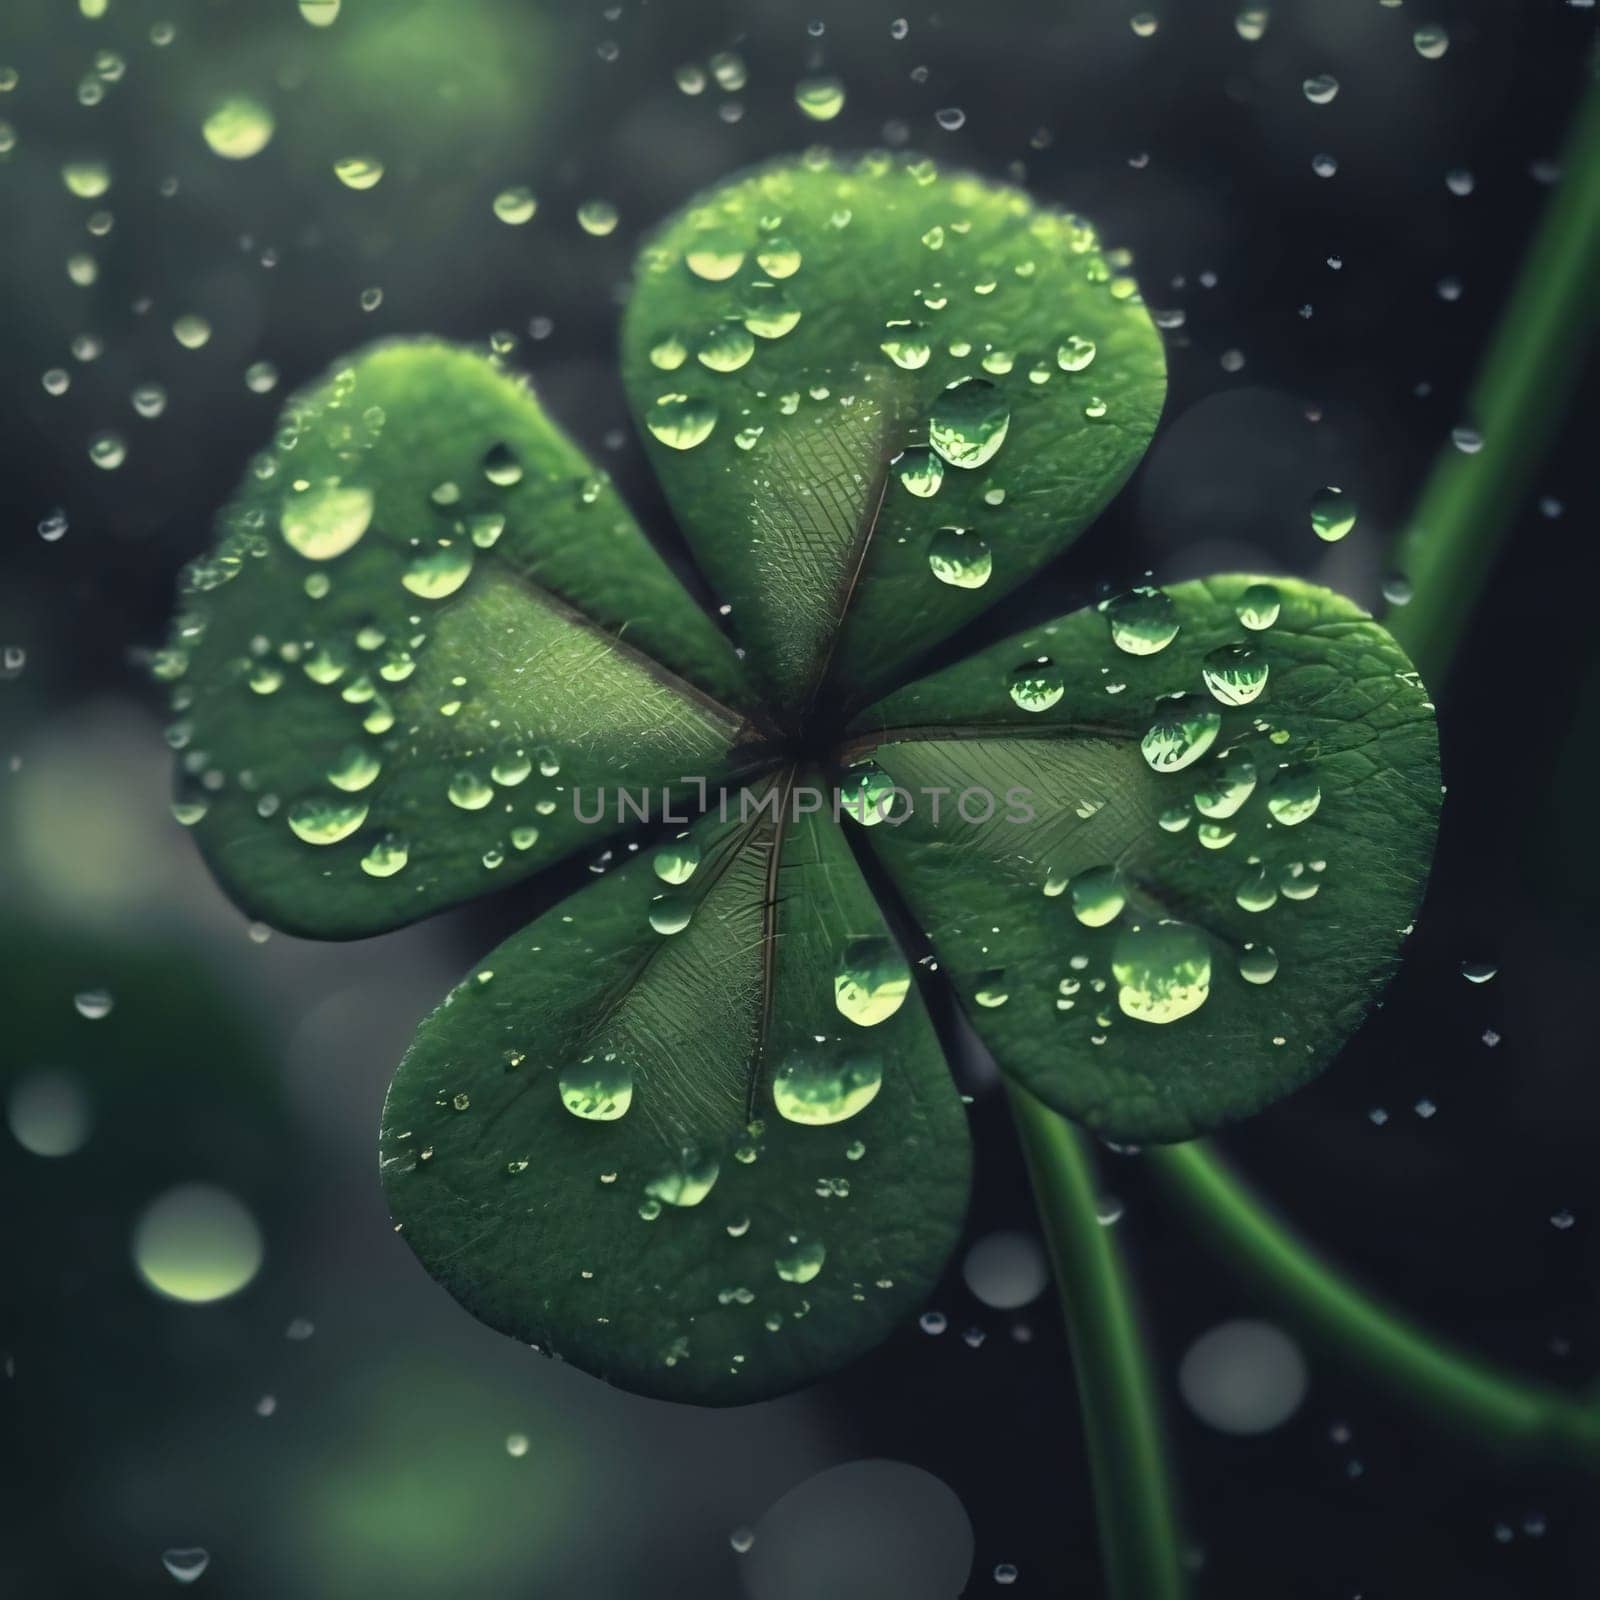 Four-leaf green clover with raindrops, dew on dark background. Green four-leaf clover symbol of St. Patrick's Day. by ThemesS